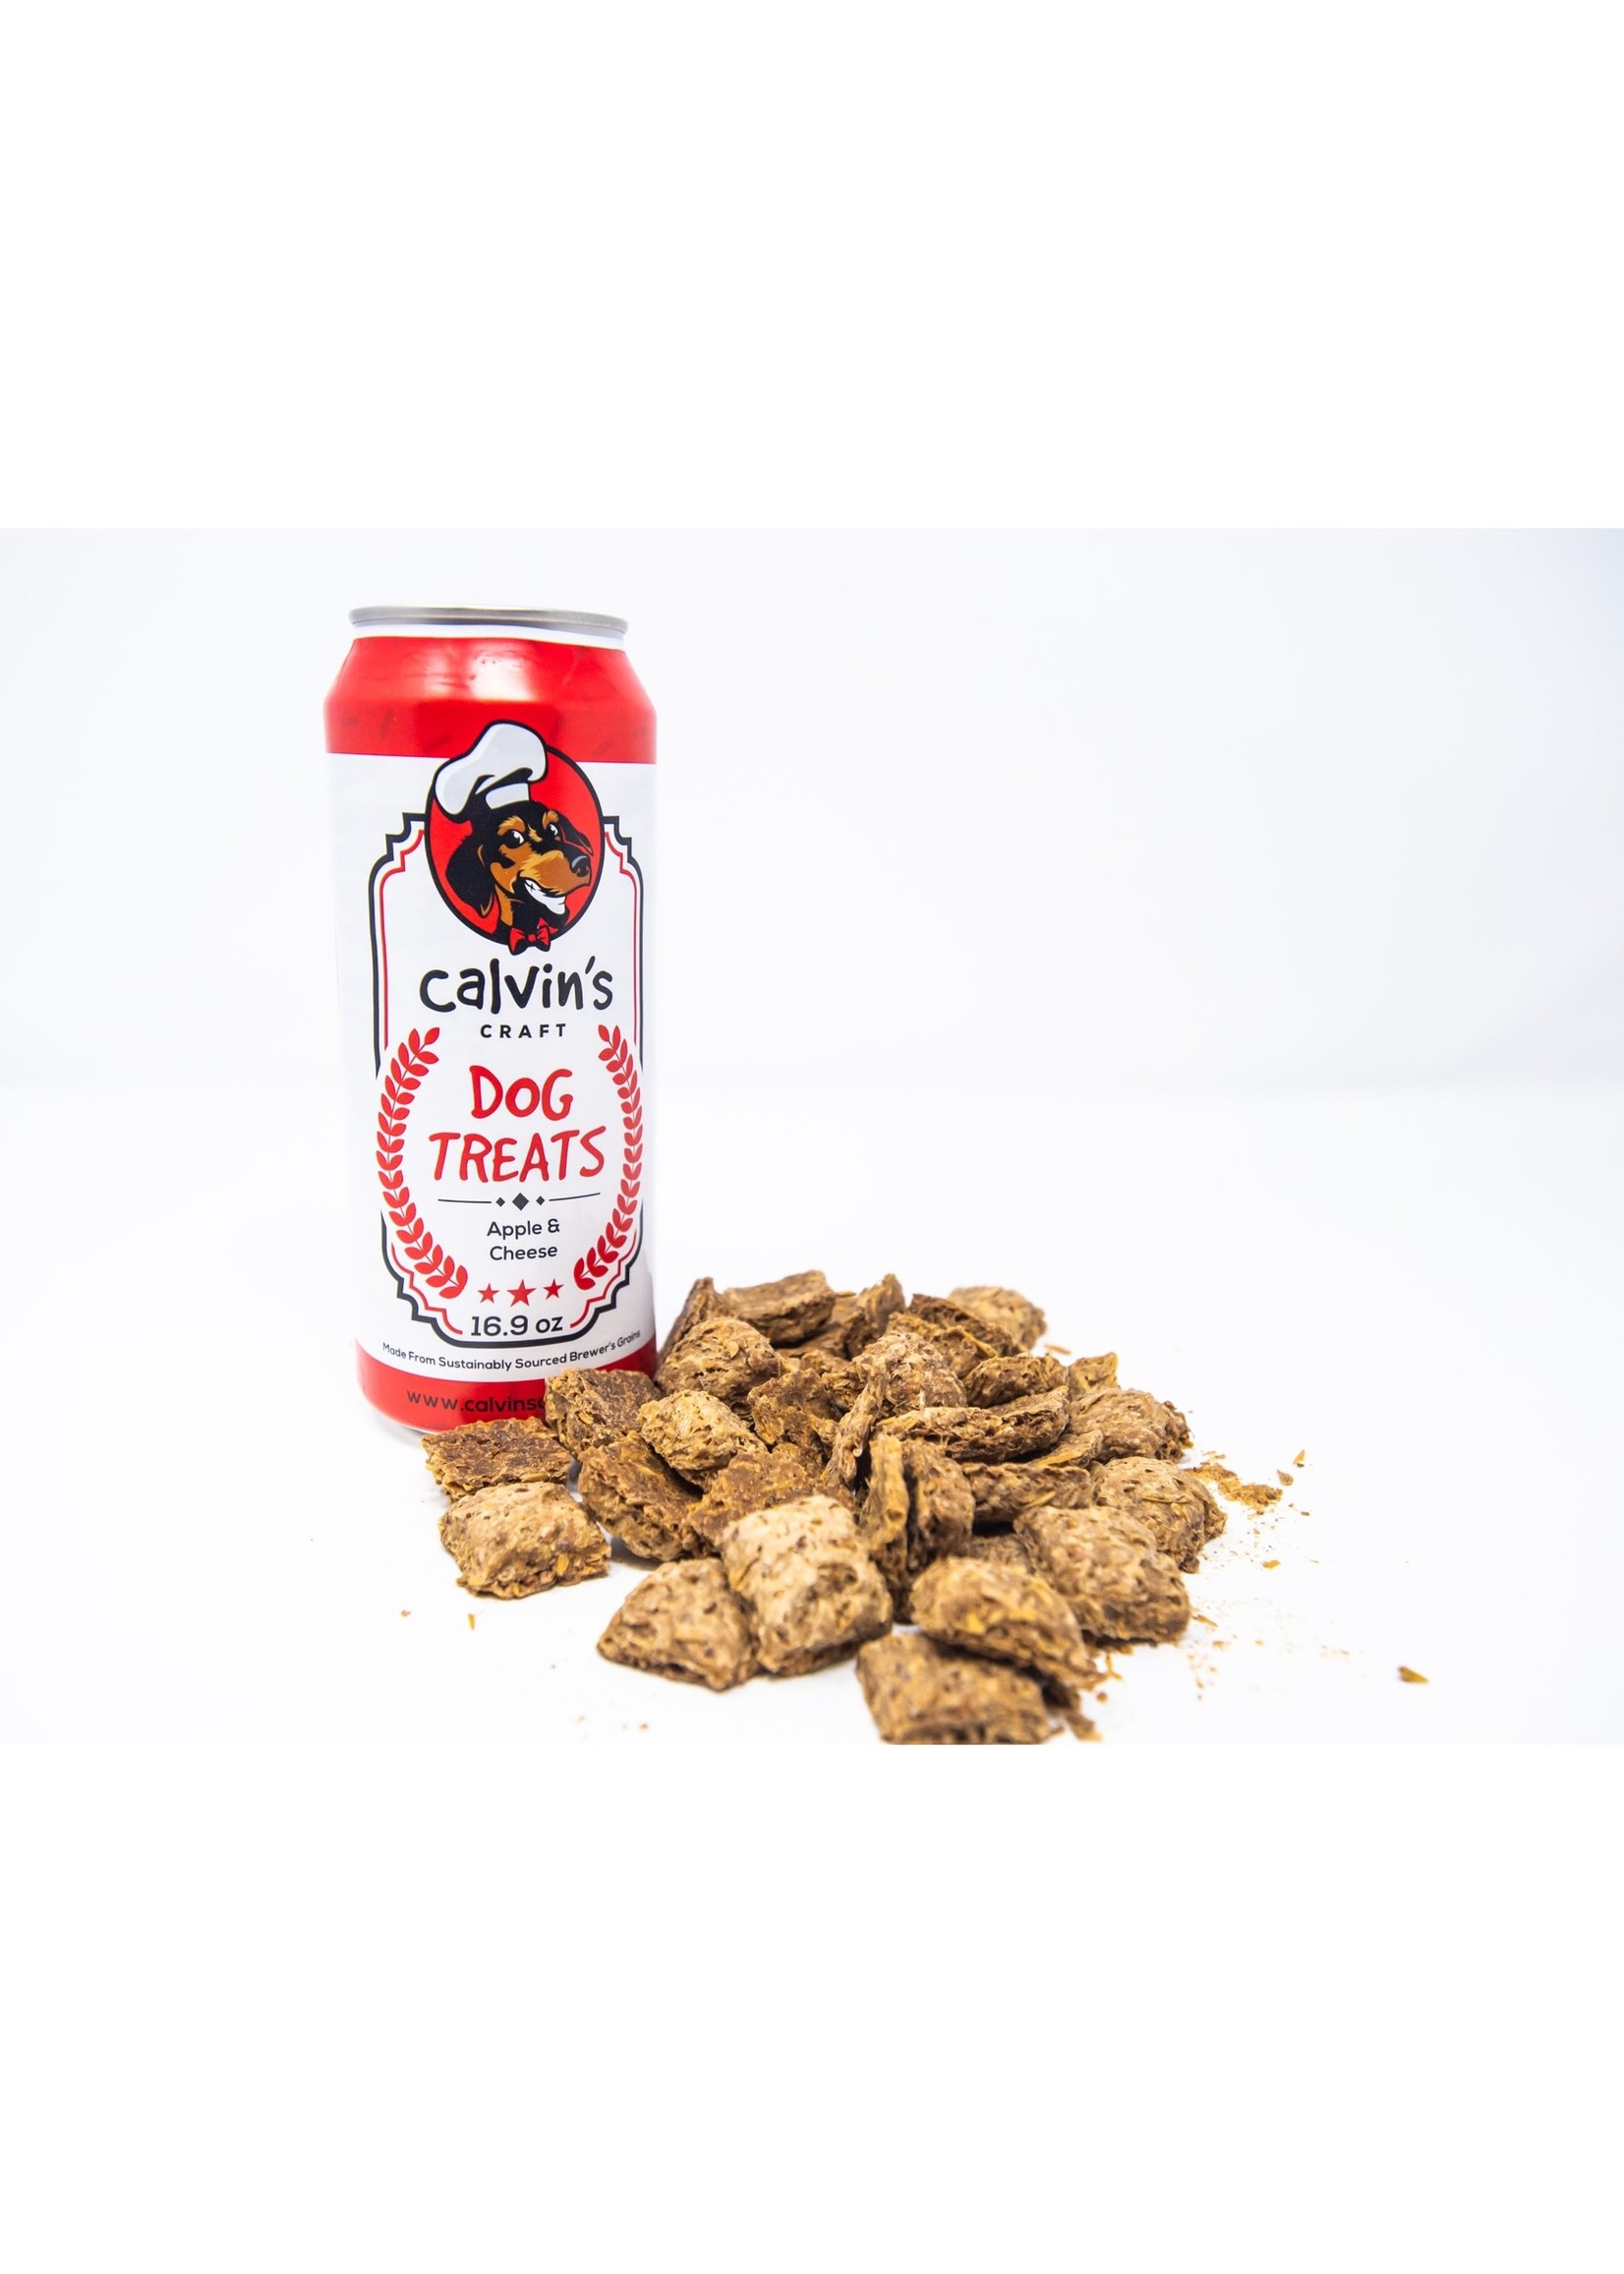 Calvin's Craft Dog Treats In A Beer Can